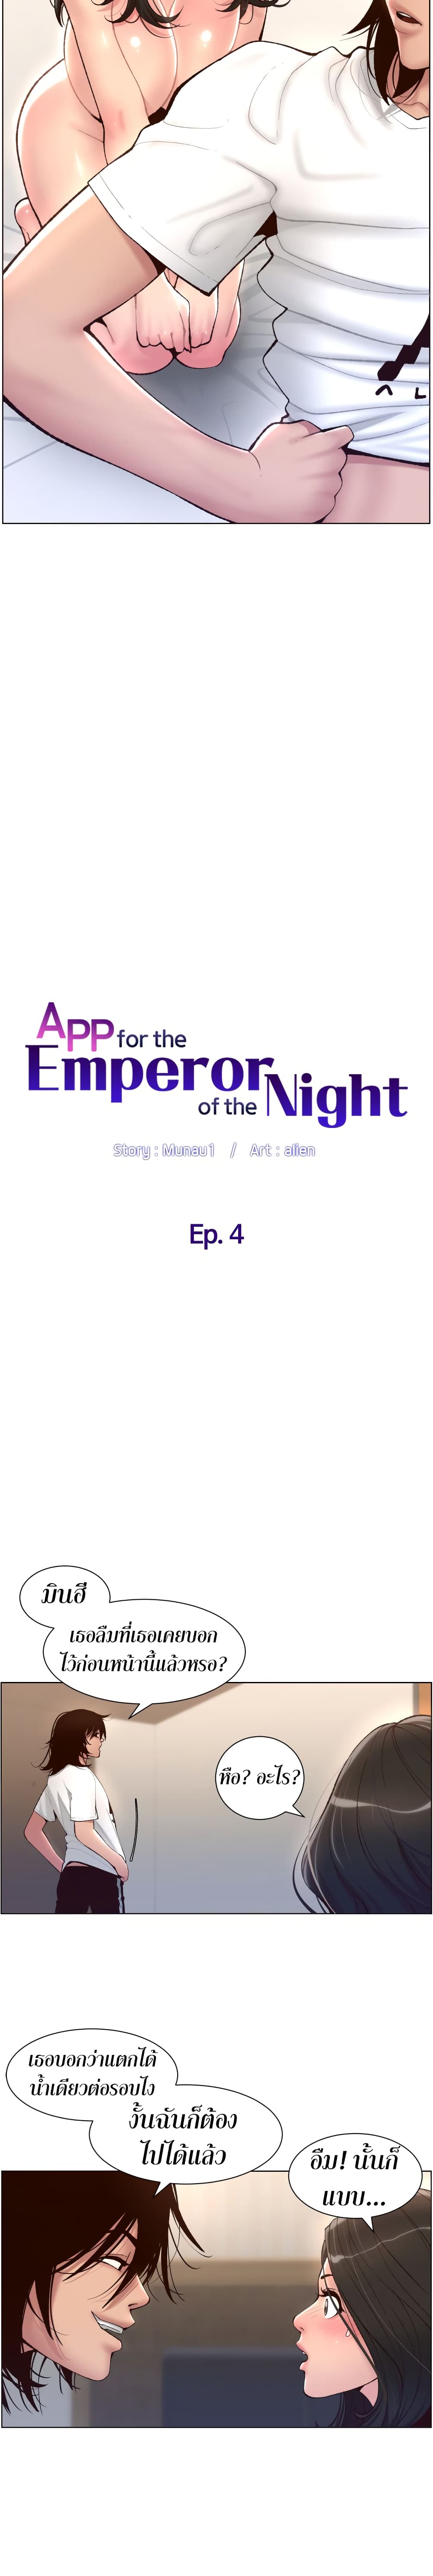 APP for the Emperor of the Night 4-4